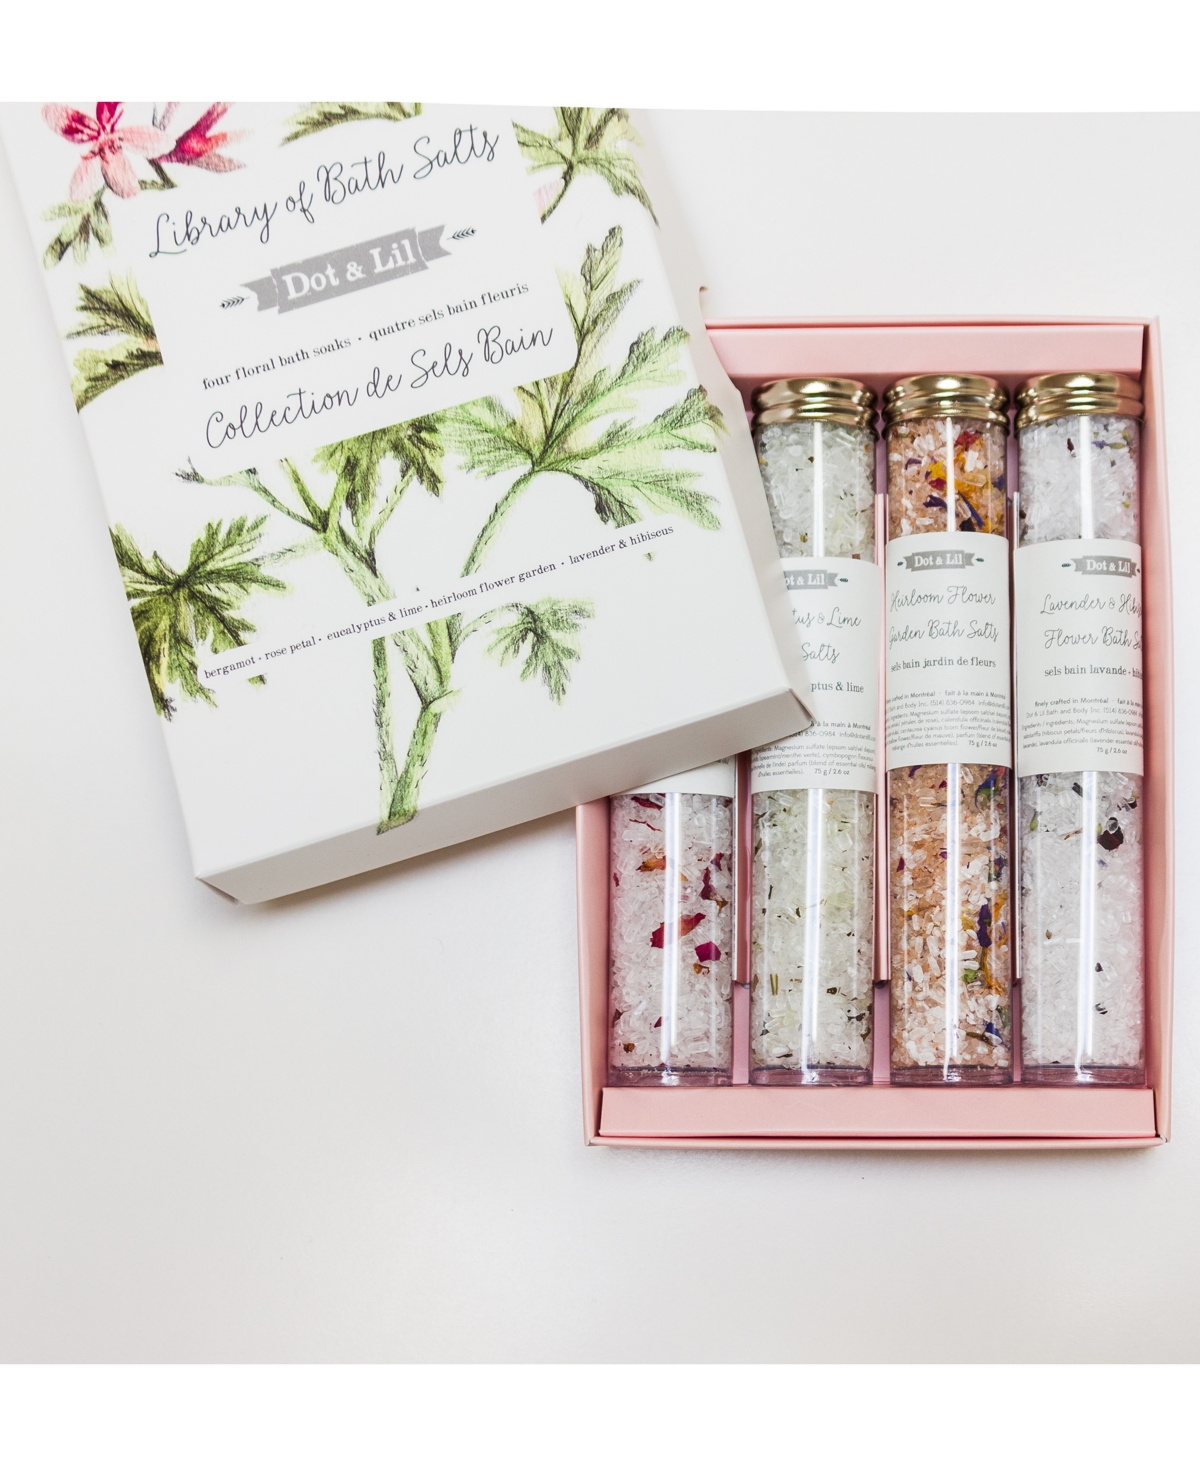 4-Pc. Library Of Bath Salts Gift Set